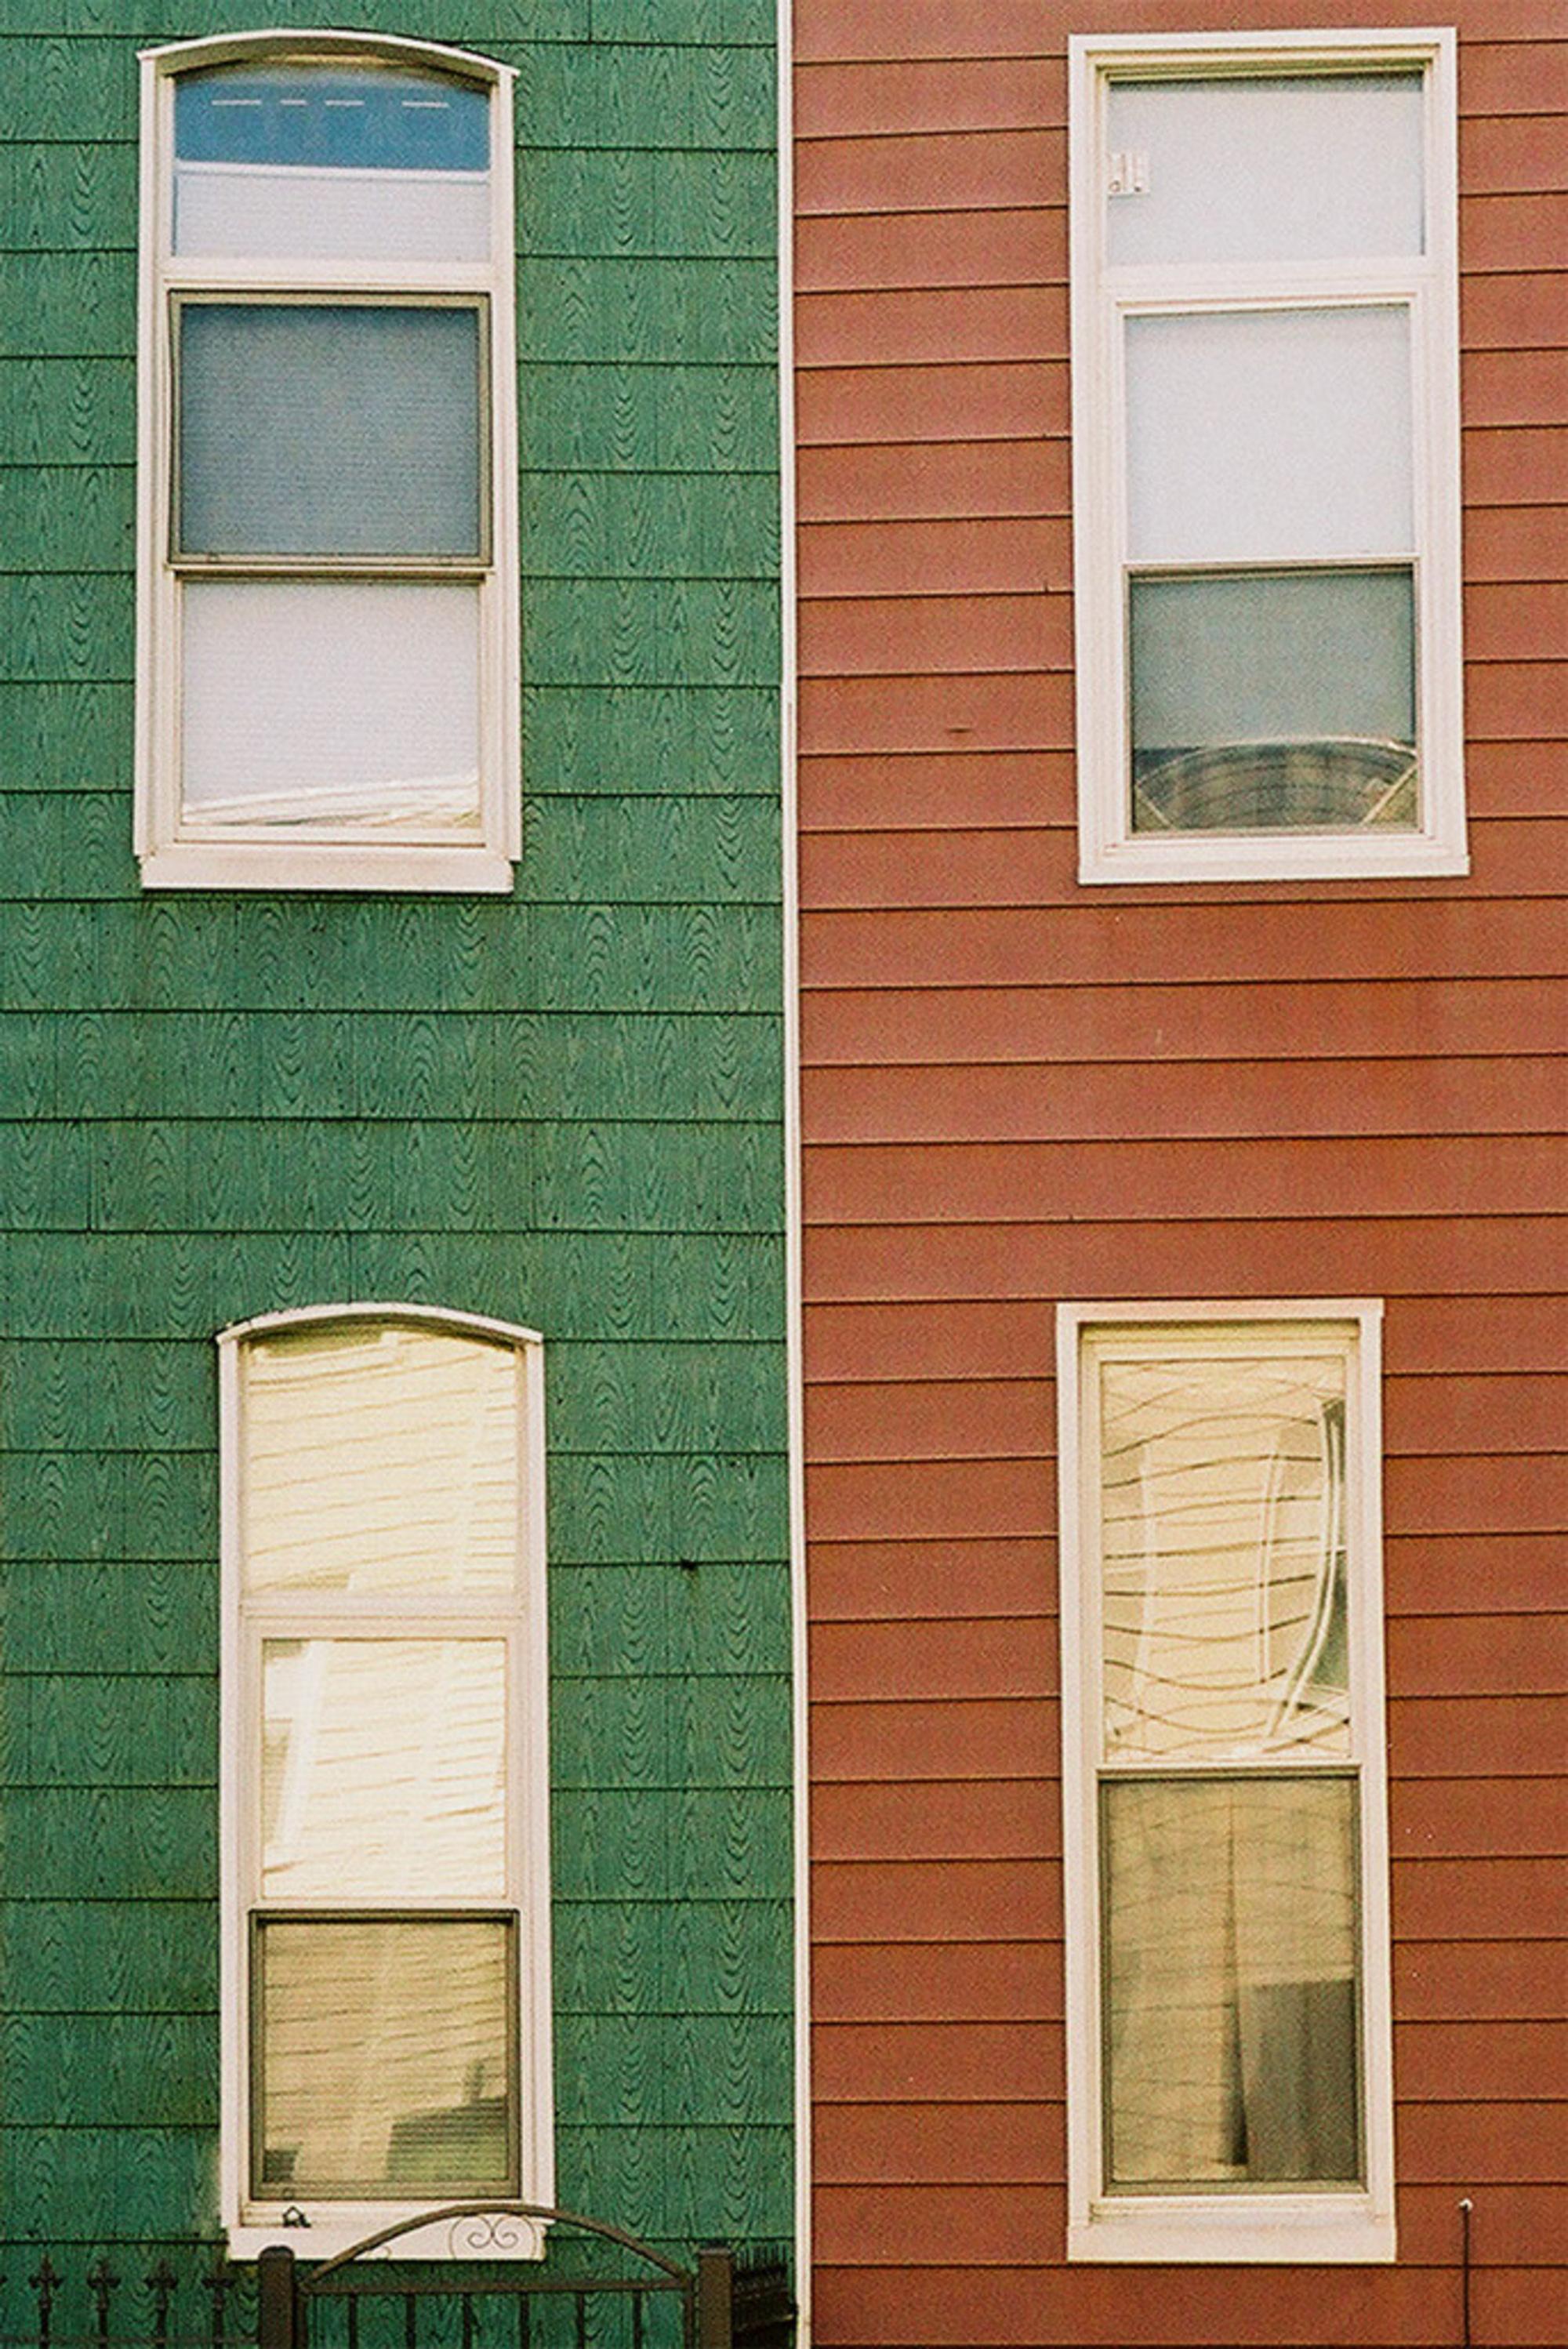 Susan Daboll Color Photograph - Williamsburg 9- Colourful Preppy Window Photographic Print on Paper